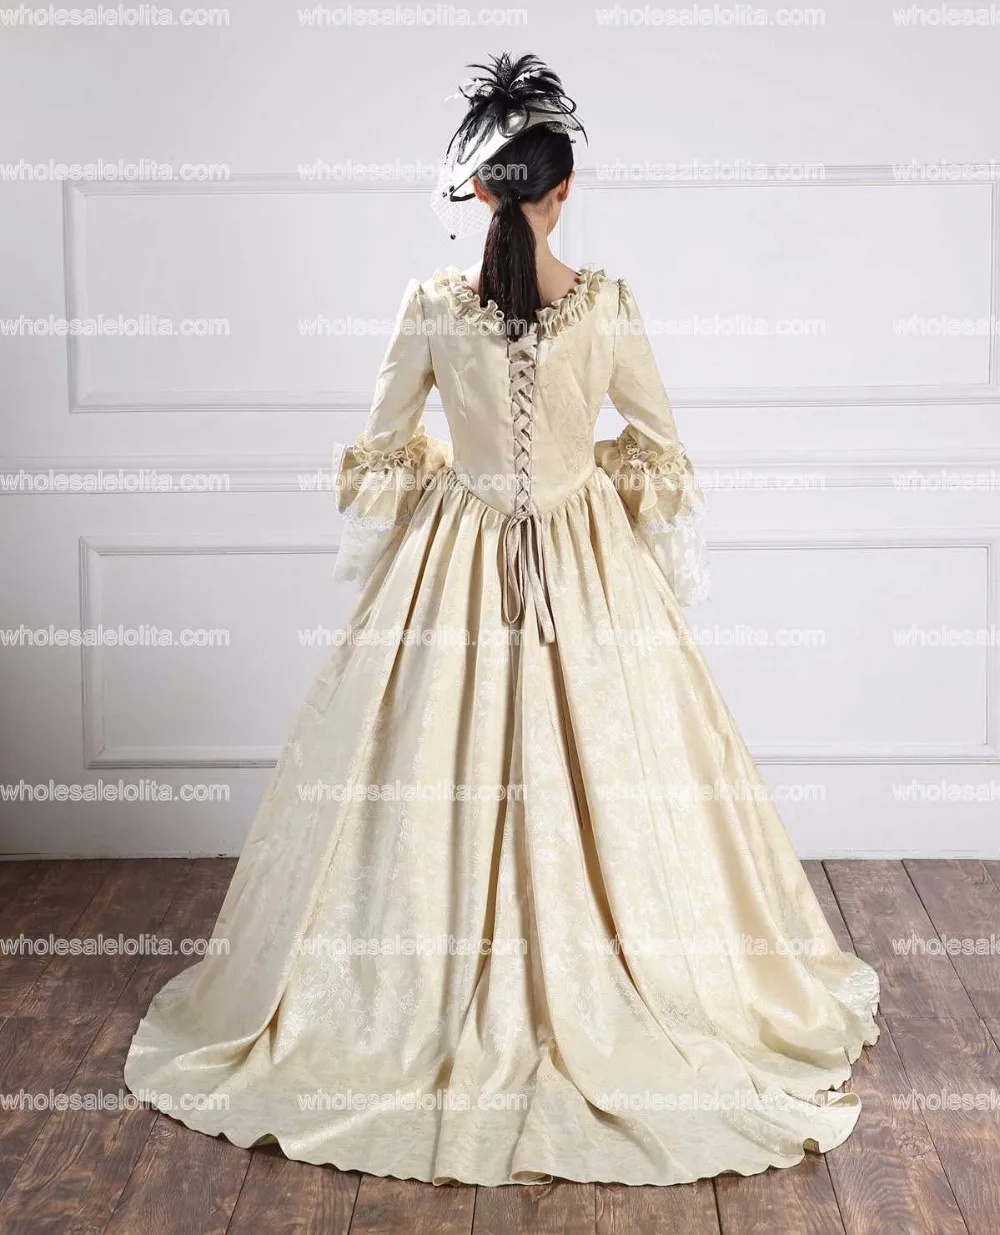 

High Quality Holiday Champagne Baroque Marie Antoinette Dress 18th Century Renaissance Historical Period Costumes